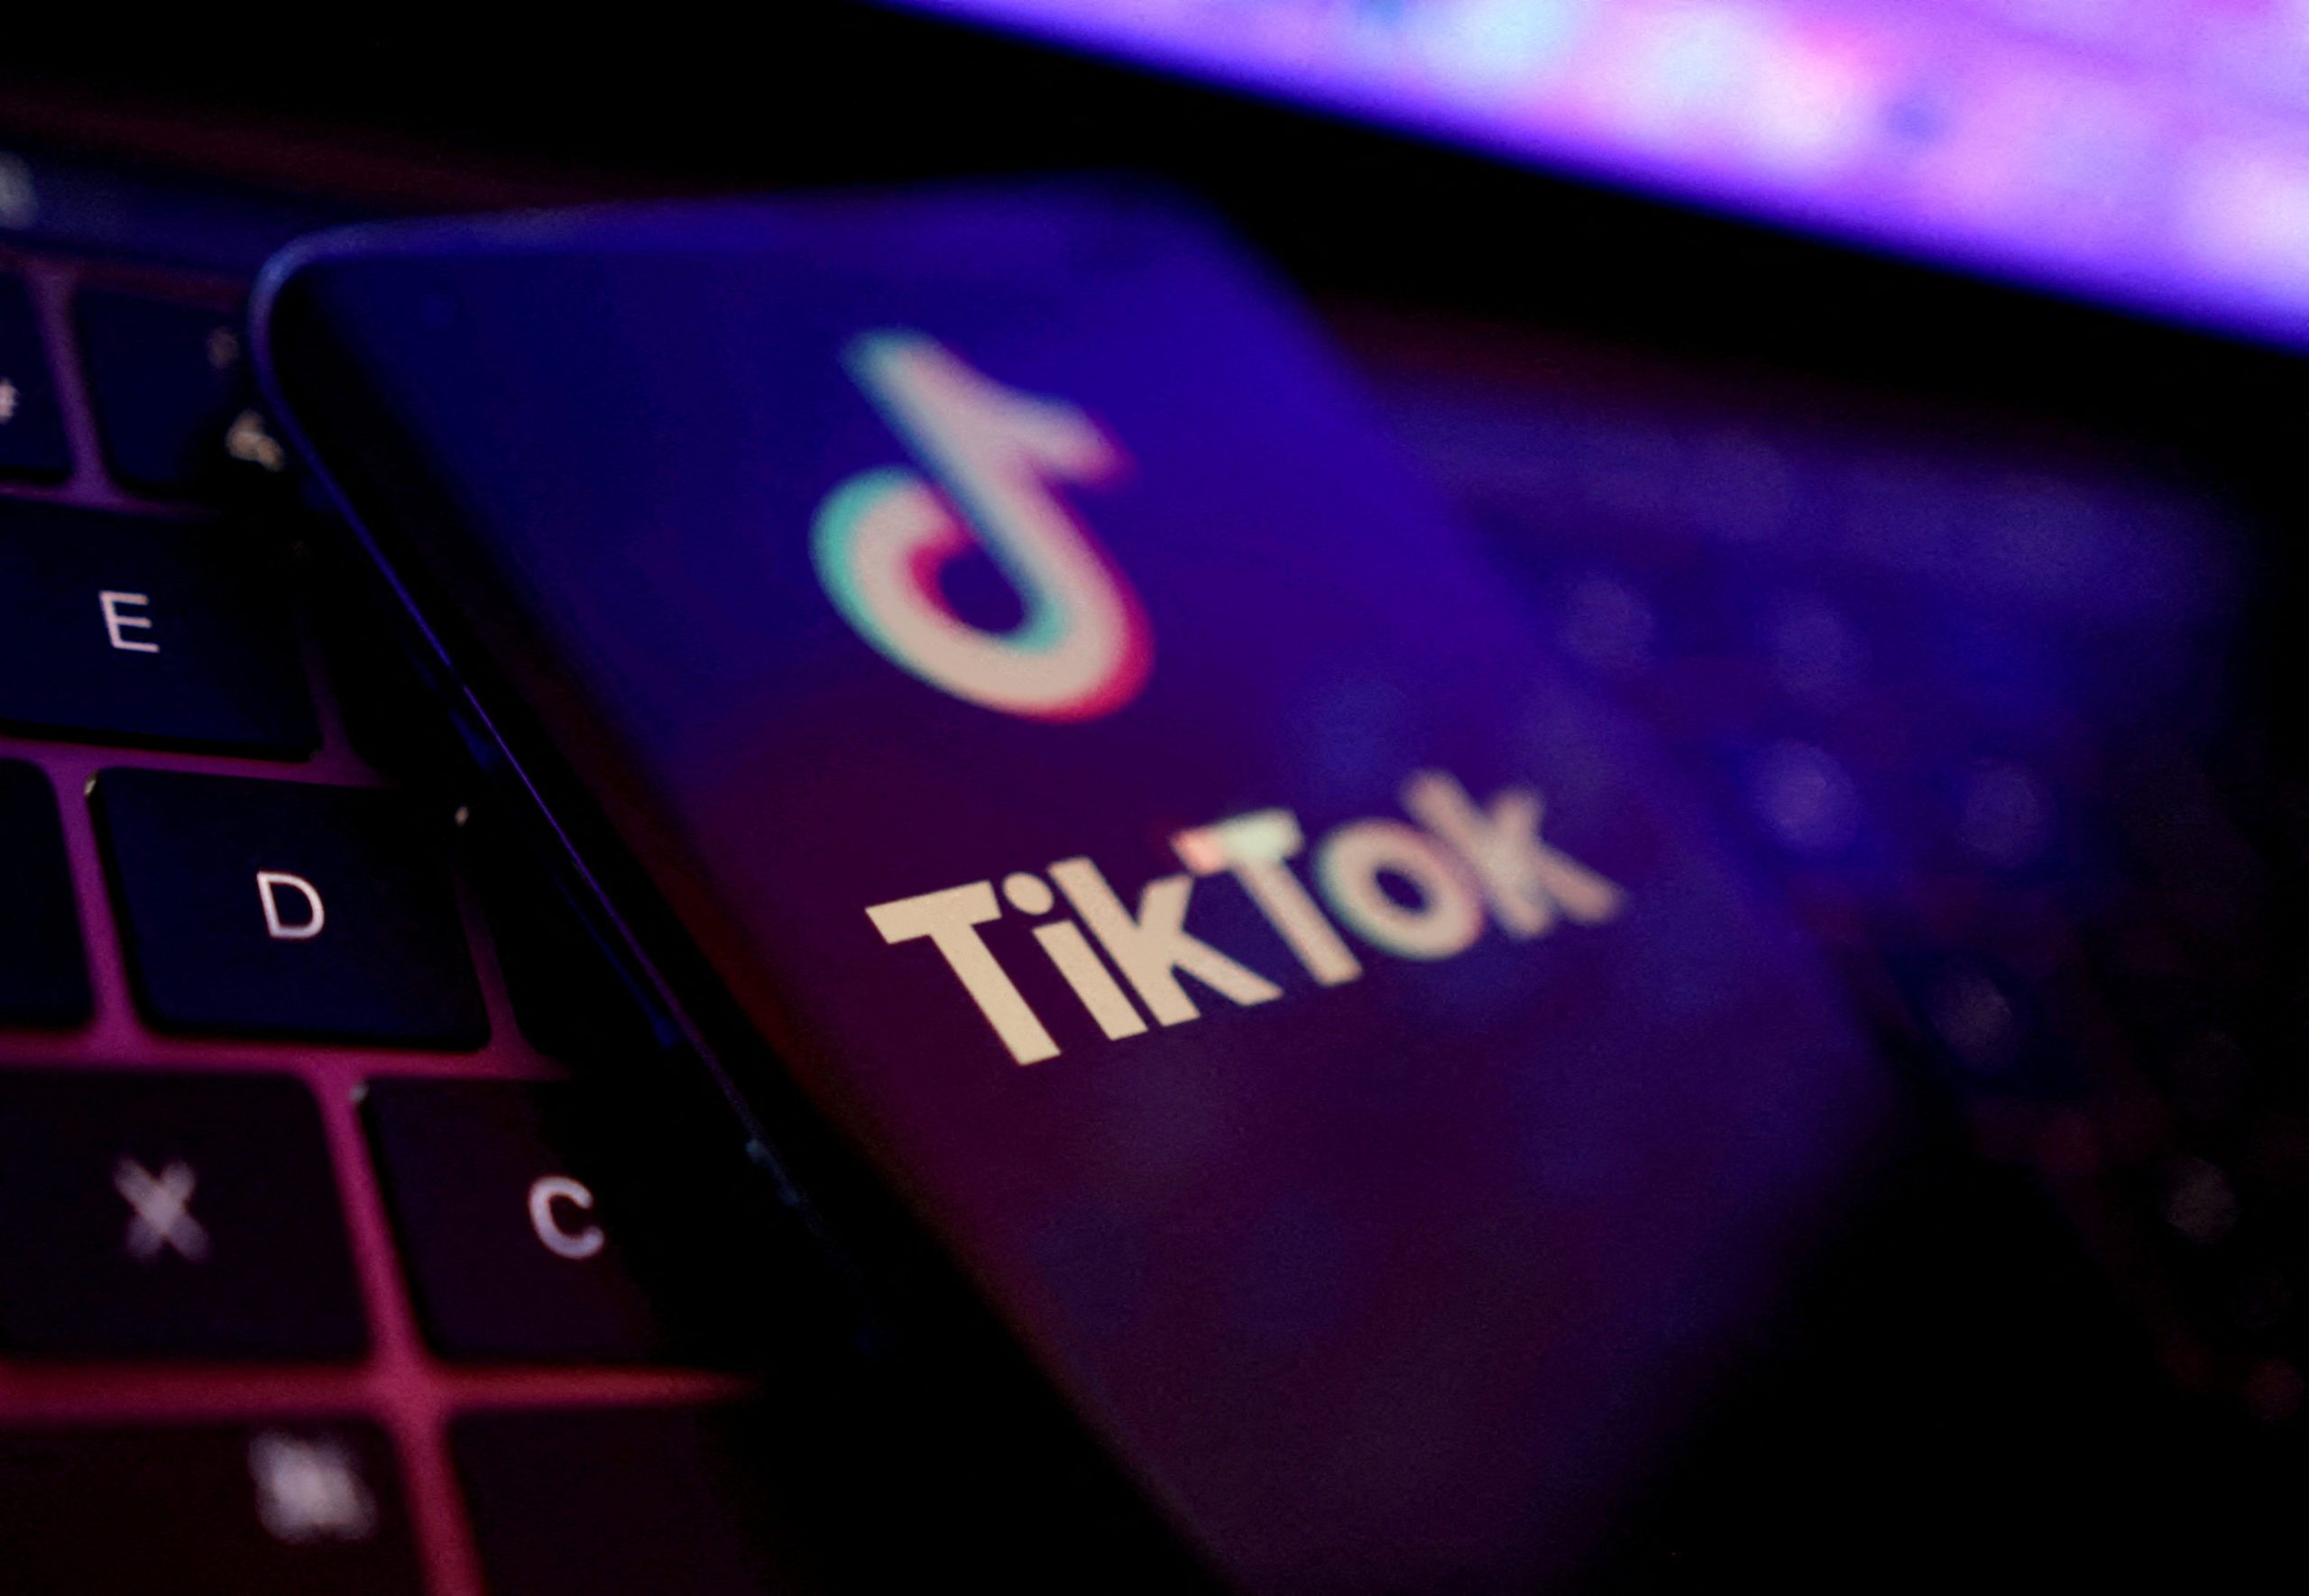 TikTok CEO Shou Zi Chew grilled by US lawmakers in congressional hearing